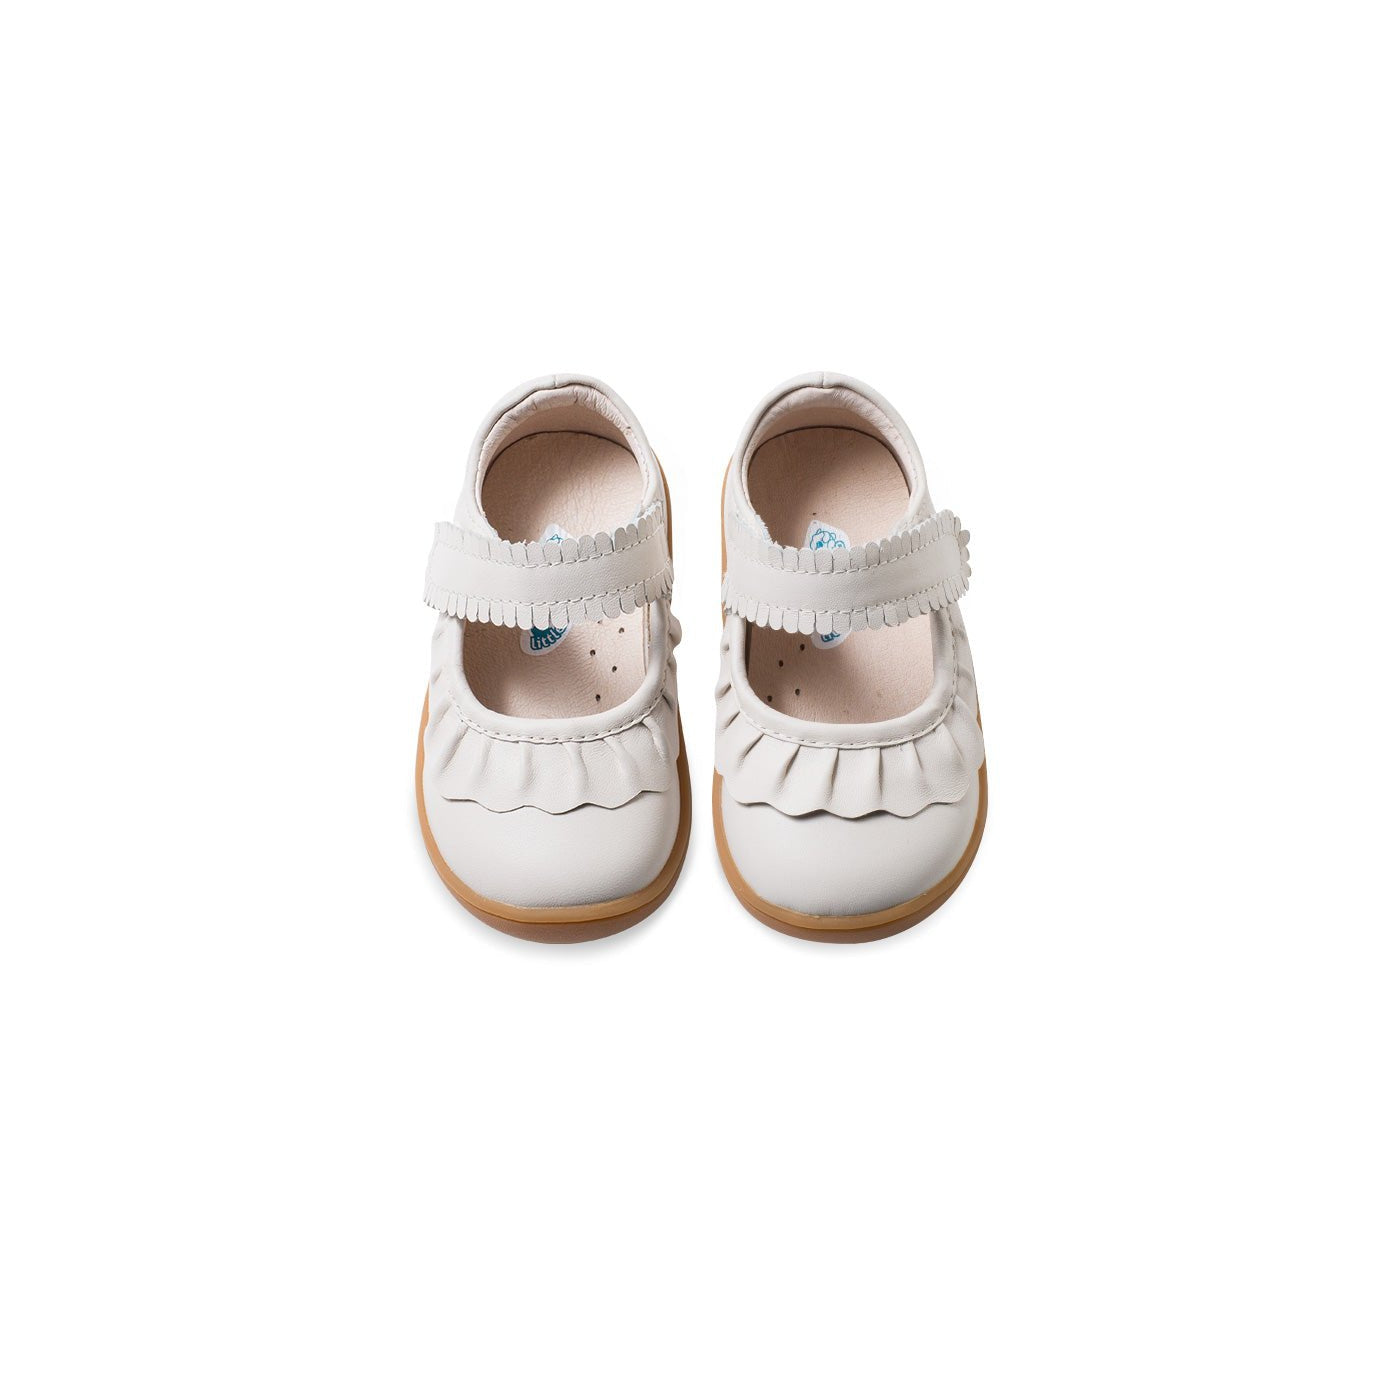 Spring Flora Soft Sole Anti-slip Pre-walker White Baby Girl Mary Jane Shoes - 0cm